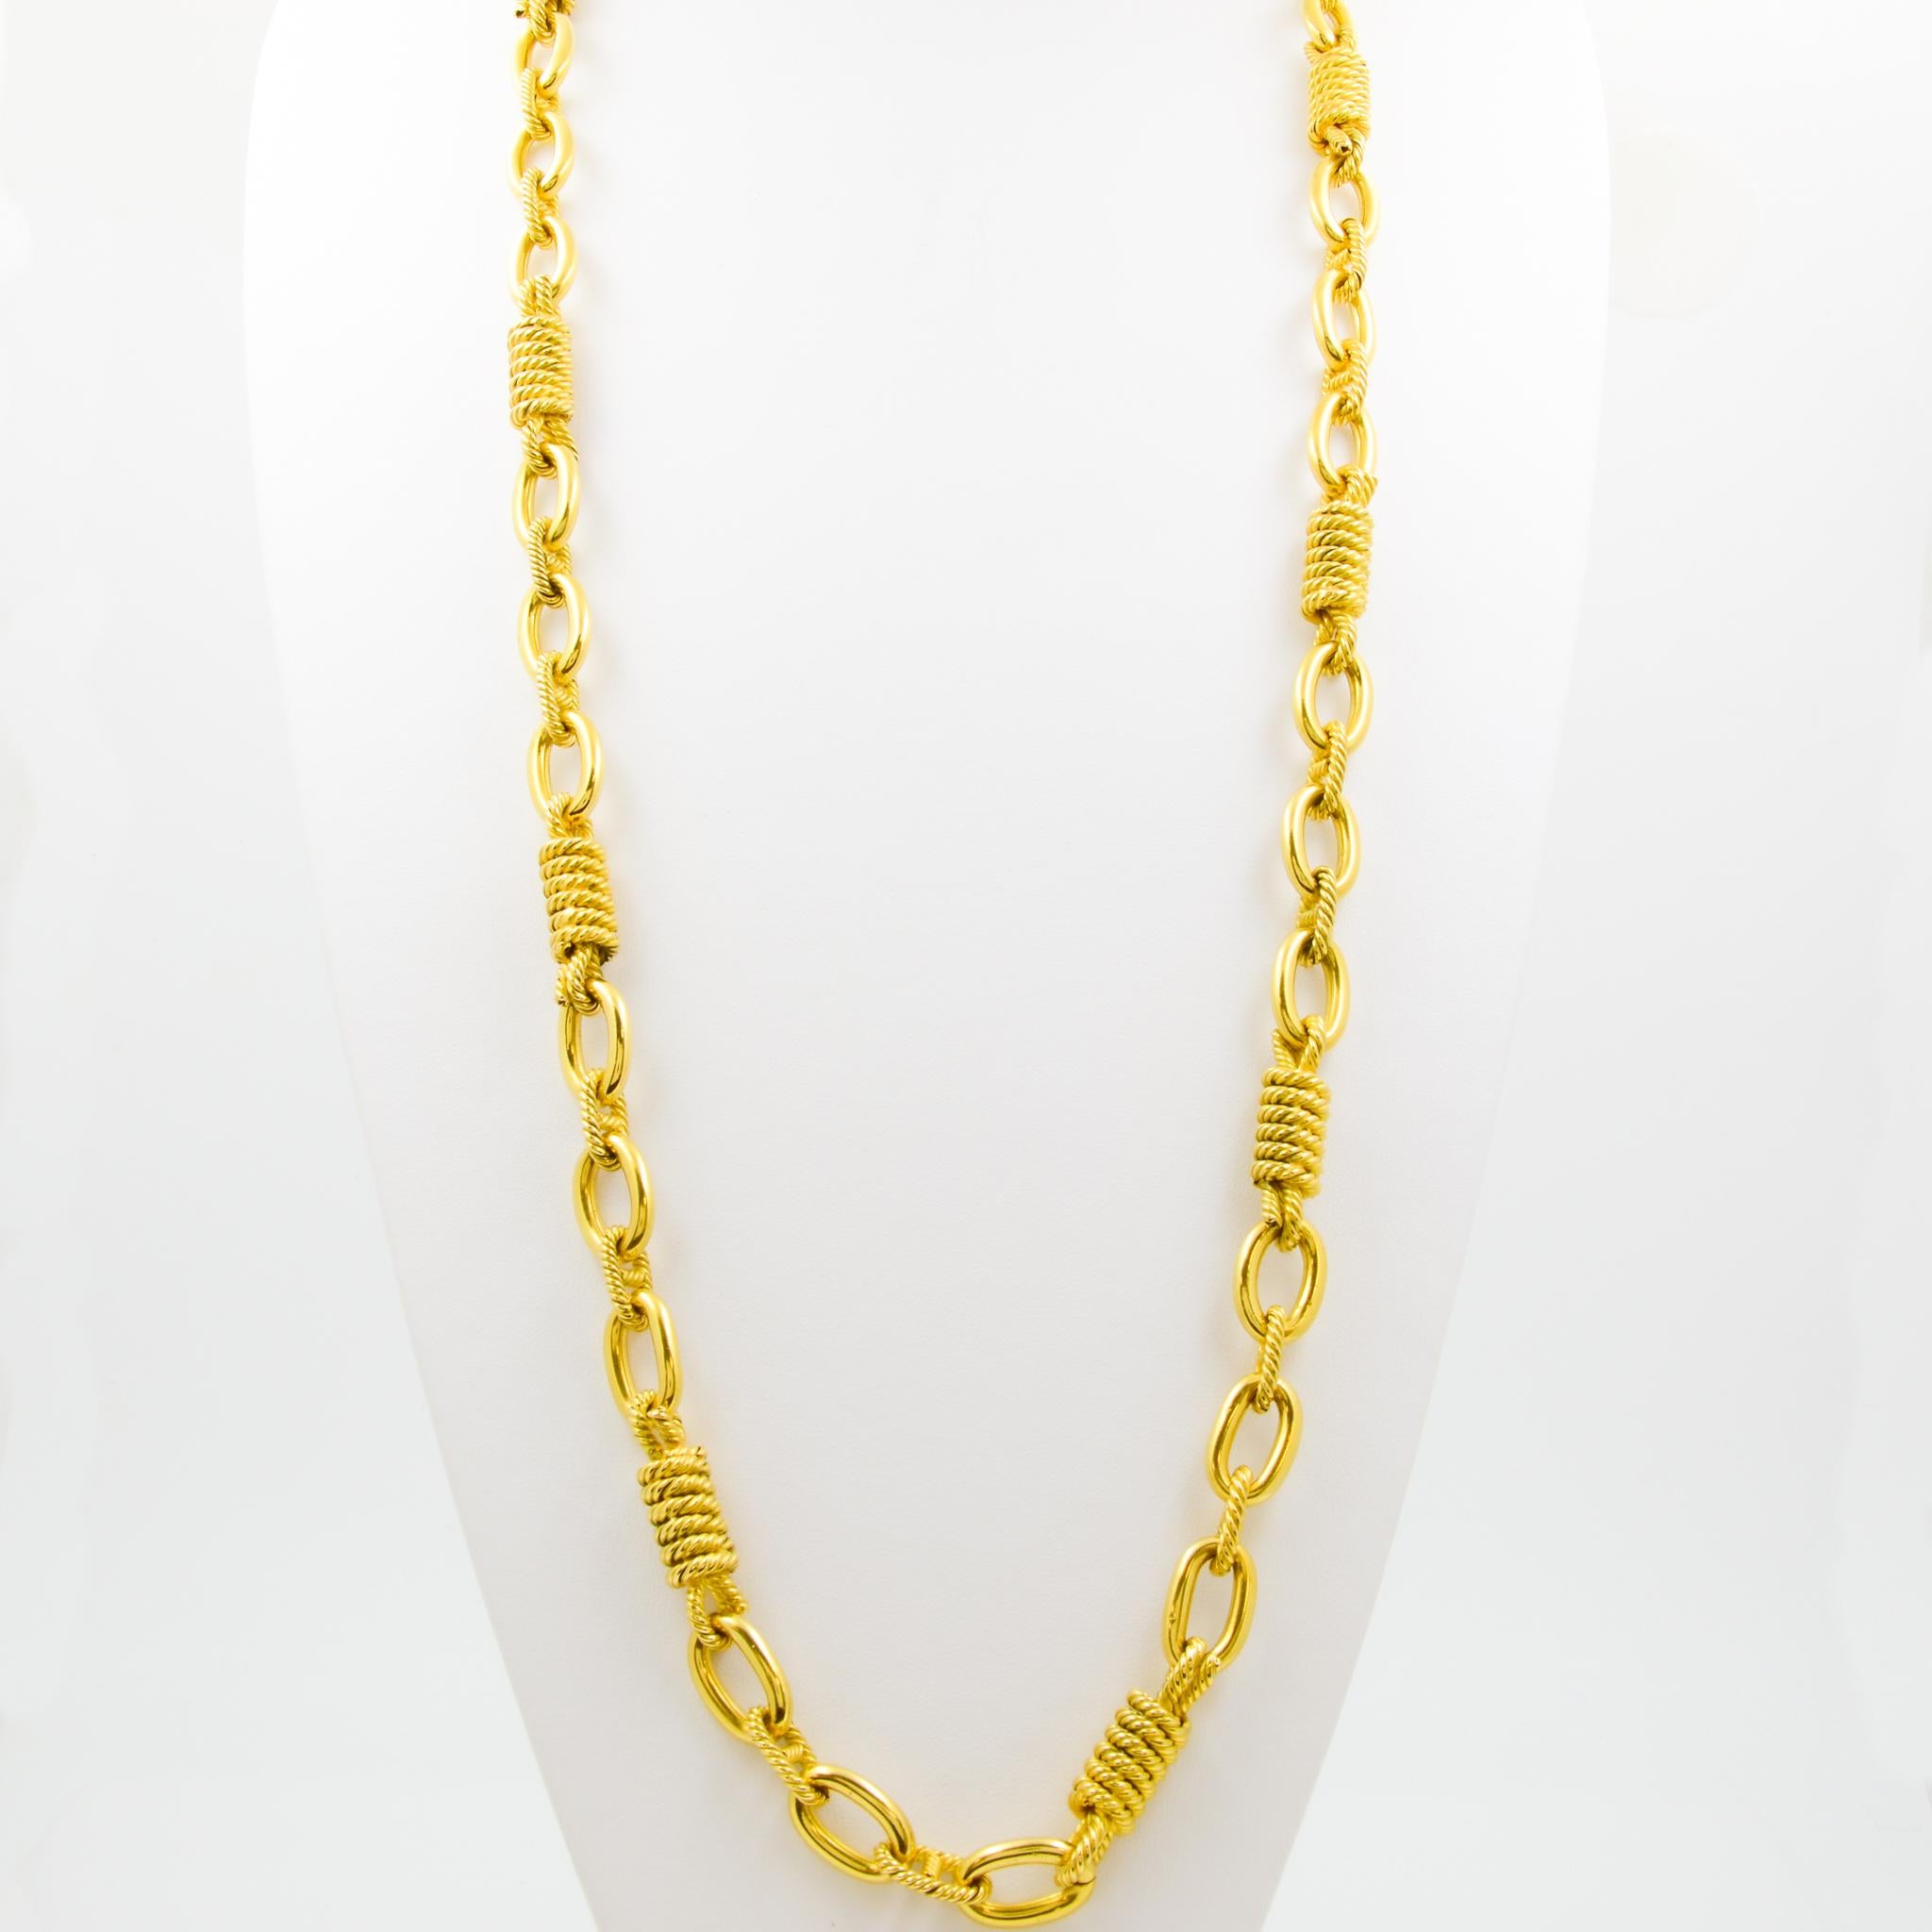 This 18 karat yellow gold chain necklace features textured wrapped rope links alternating with polished finish oval links. The necklace measures 36 inches long and does not have a clasp, perfect for draping and layering.